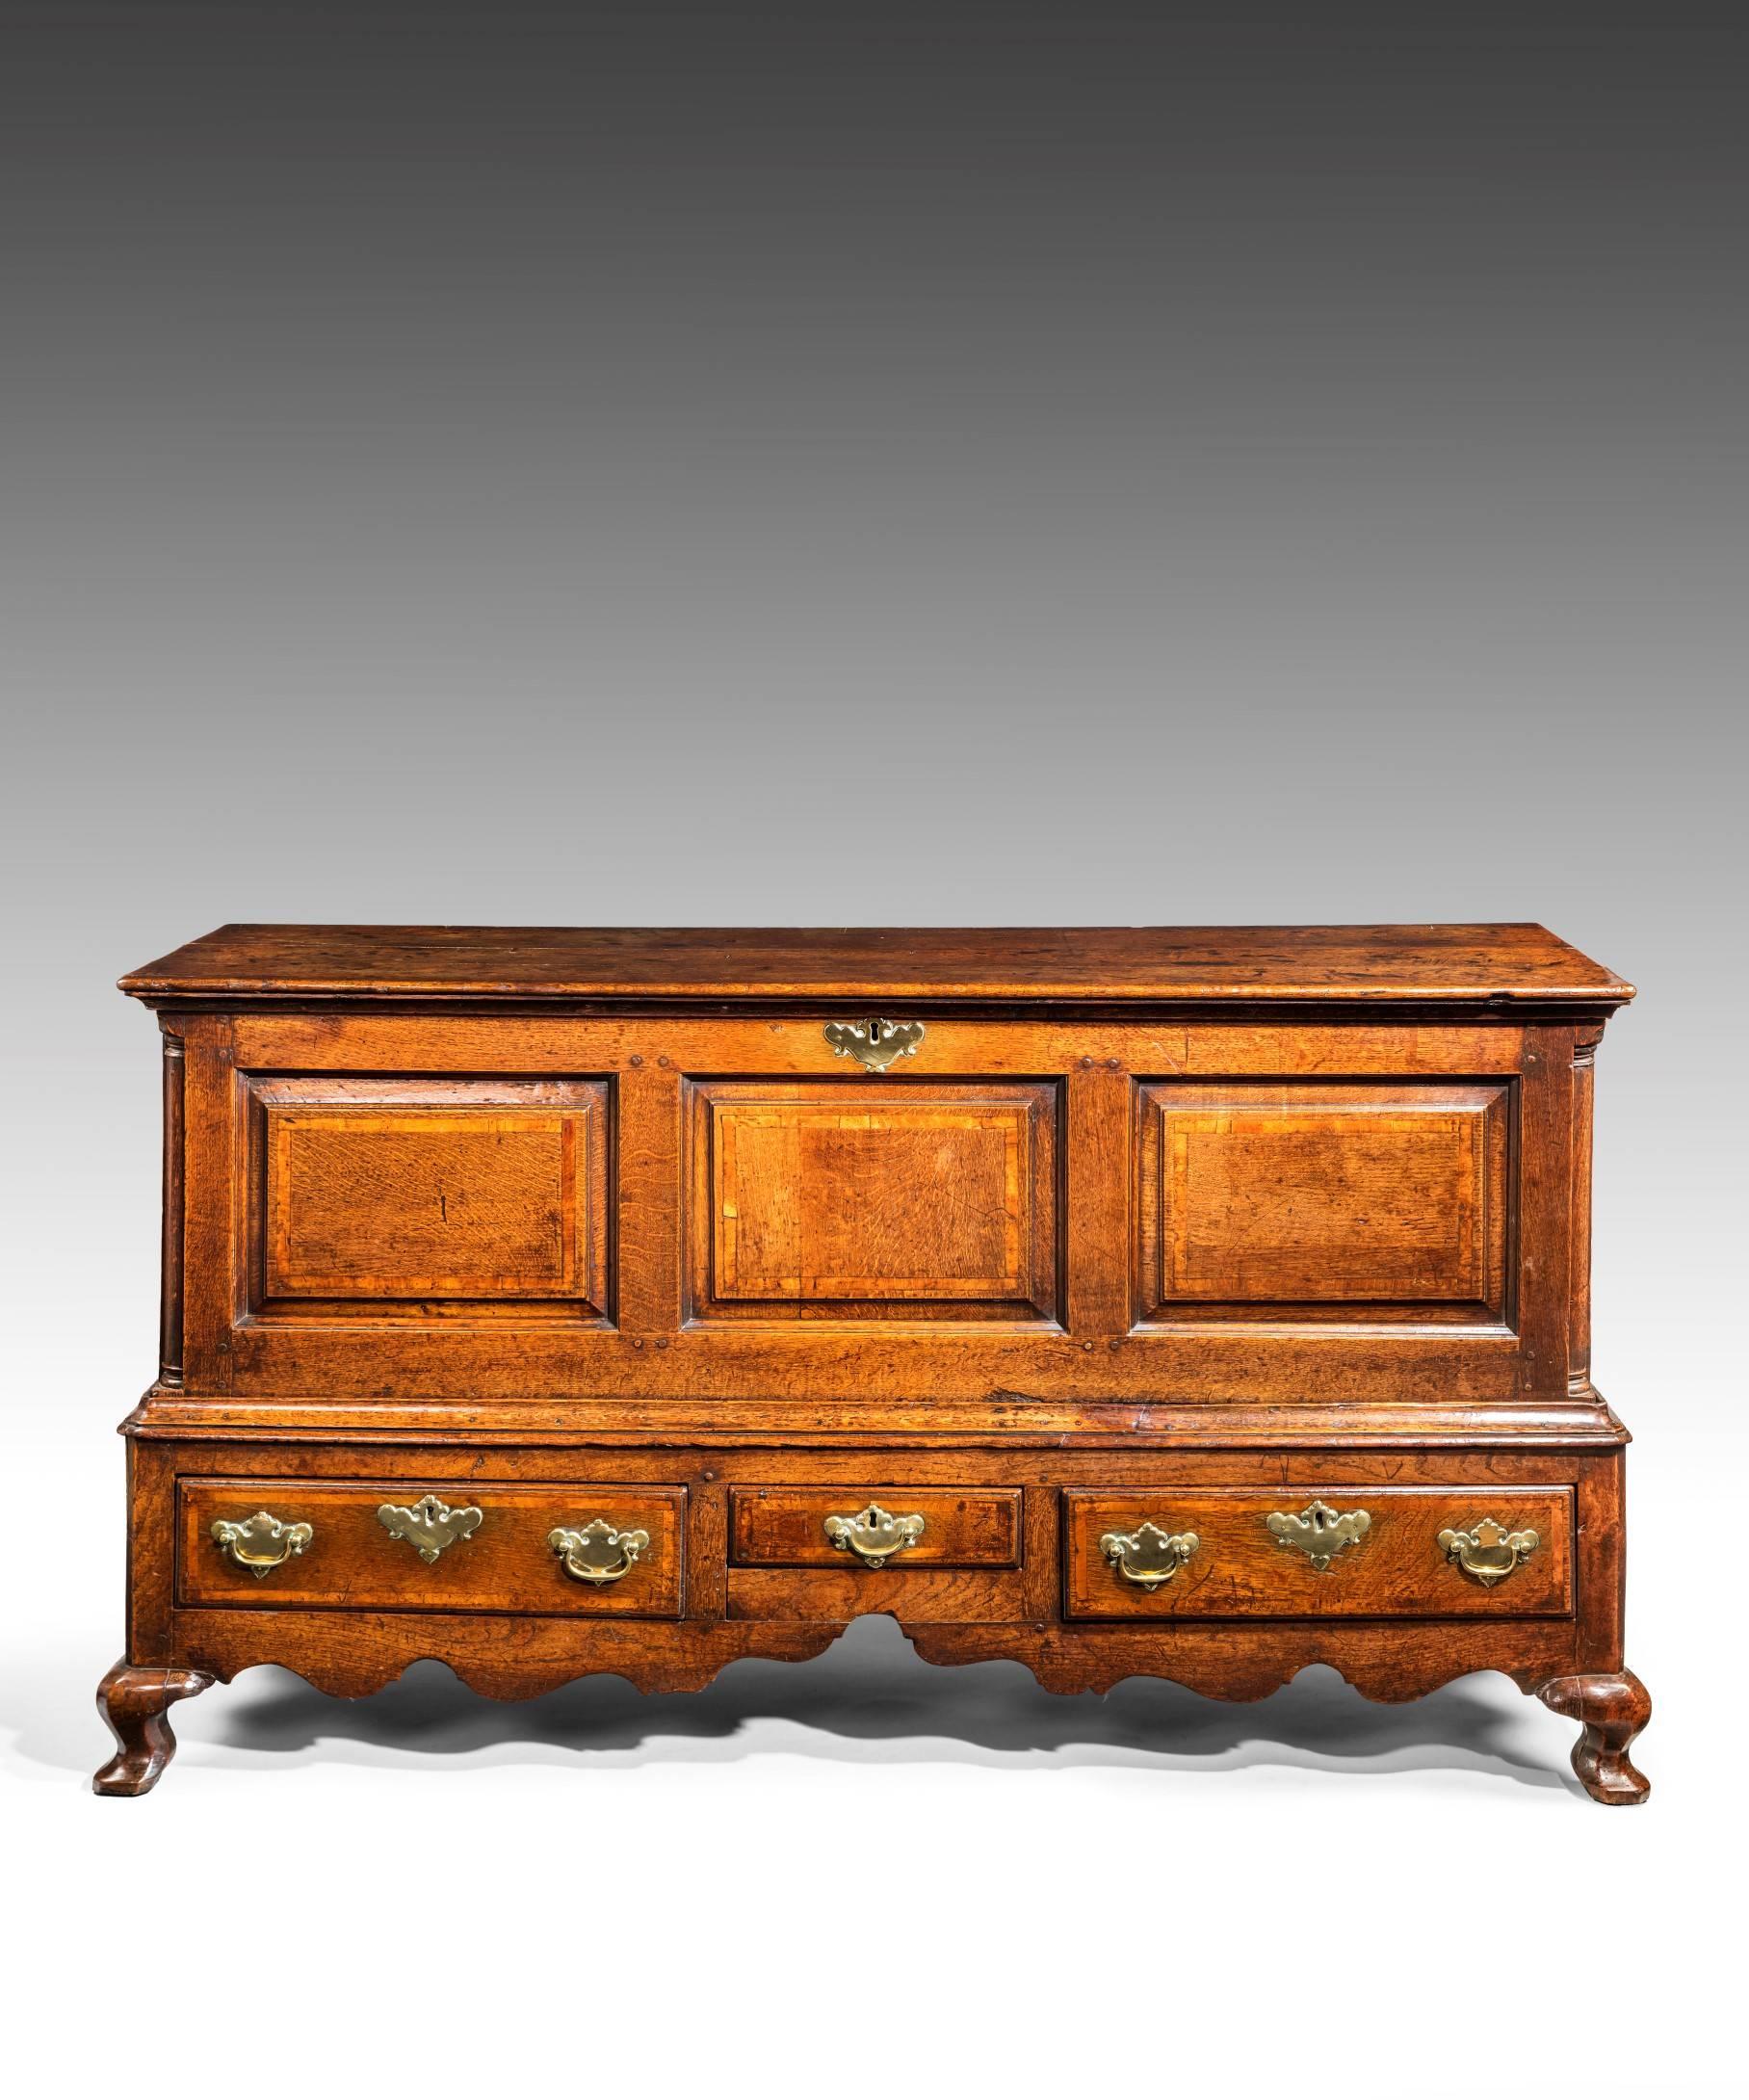 A rare George II period oak coffer/chest on stand; the lift-up lid above a fielded panel front crossbanded in walnut and with quarter columns inset into the corners; the stand with three drawers which have ovolo mouldings and are crossbanded in